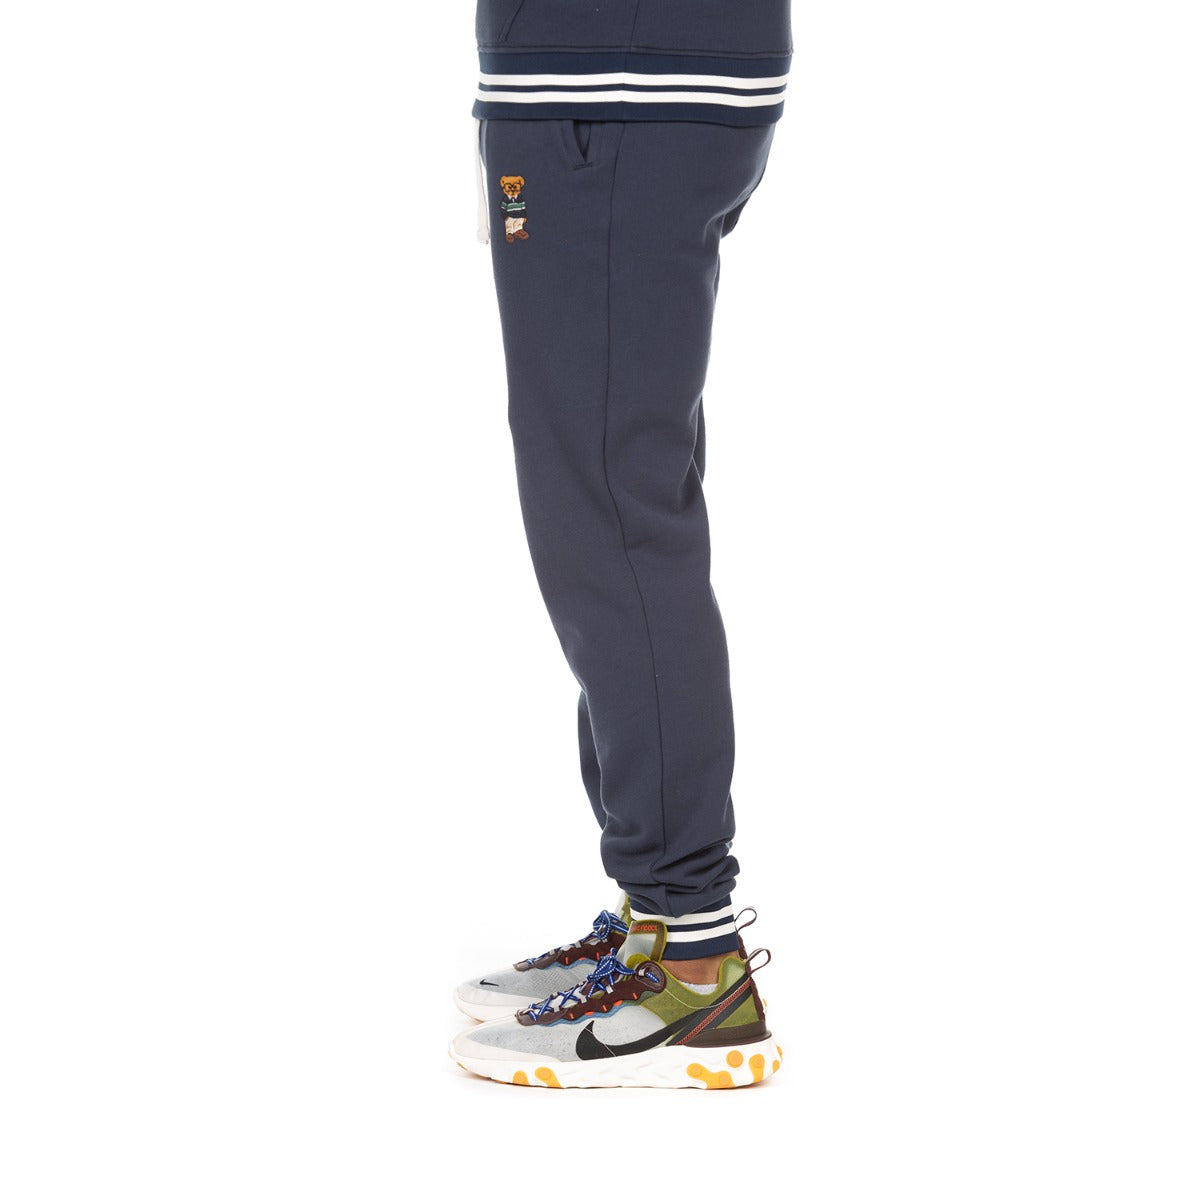 Navy Blue Graphic Sweatpants with Embroidered Text and Patch Details - Advance Pant